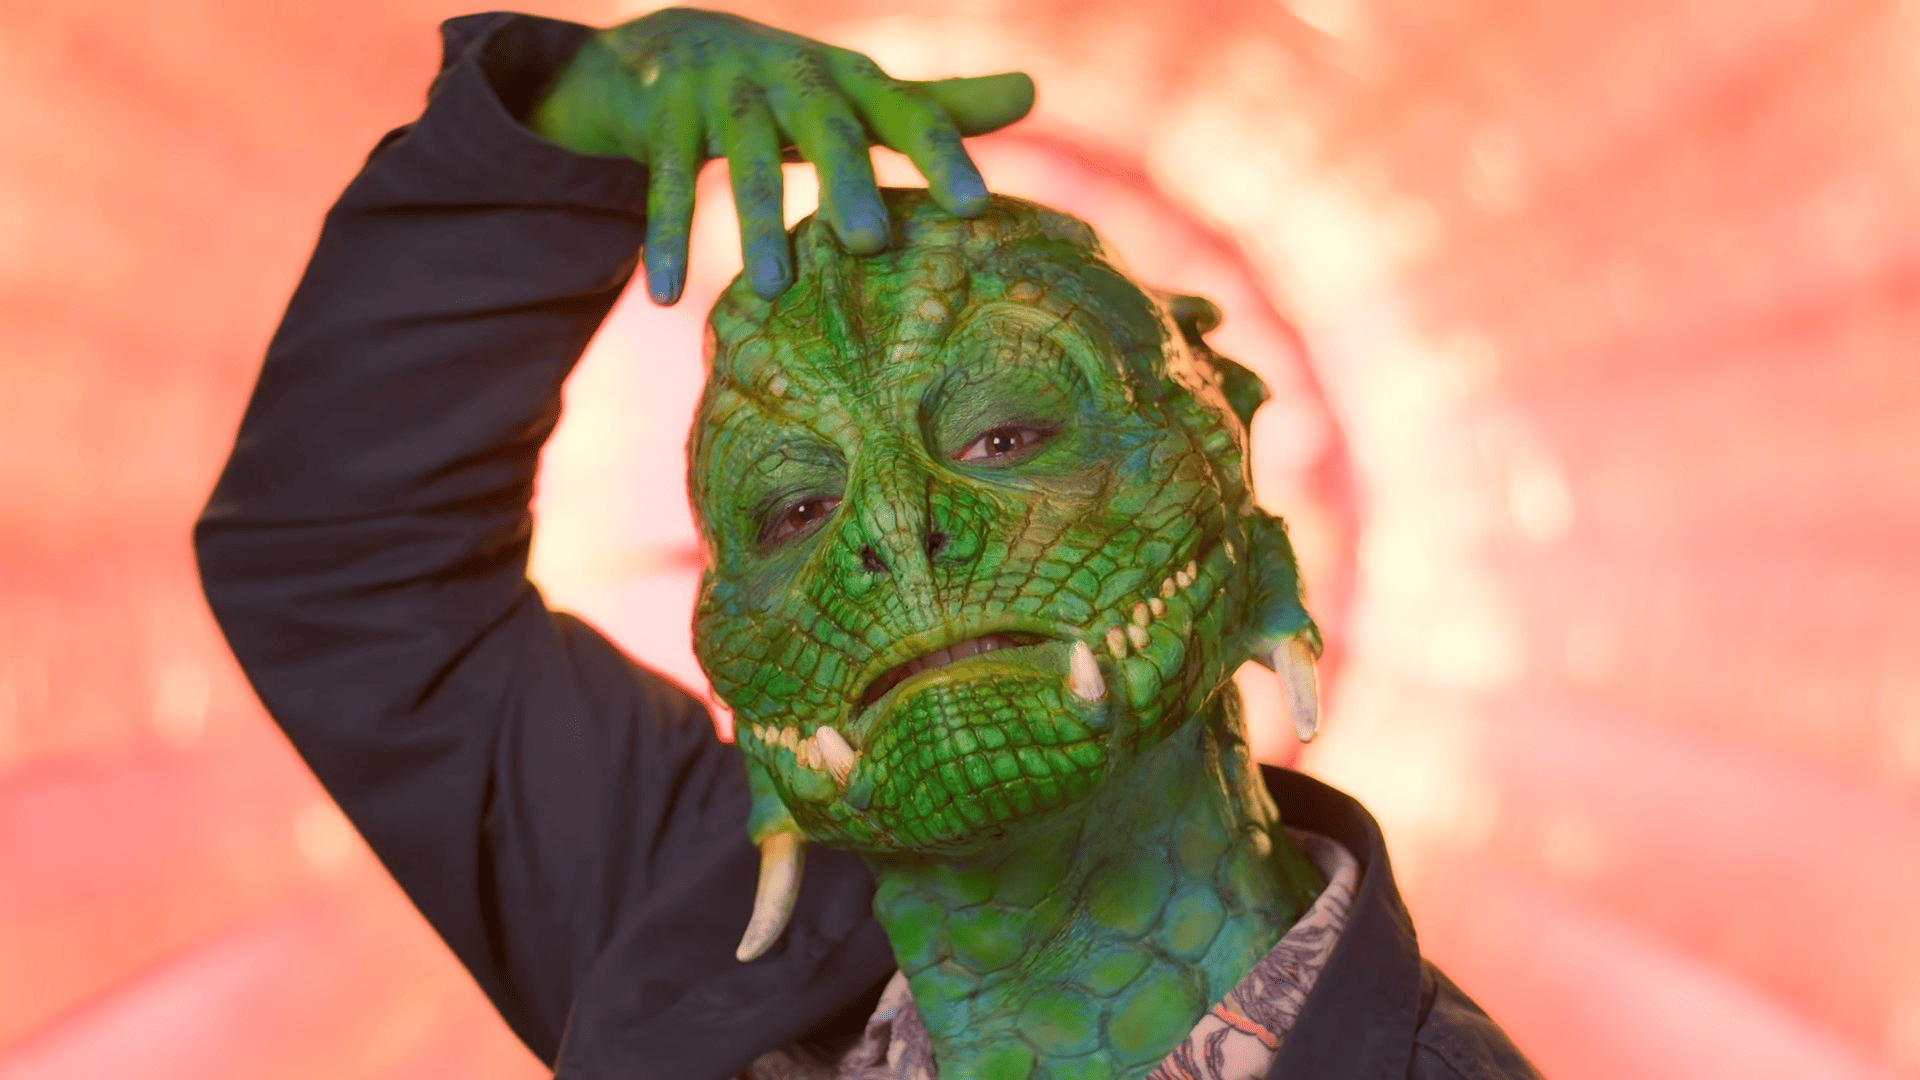 A contestant wearing prosthetic makeup to look like a dragon in this image from Lion TV.